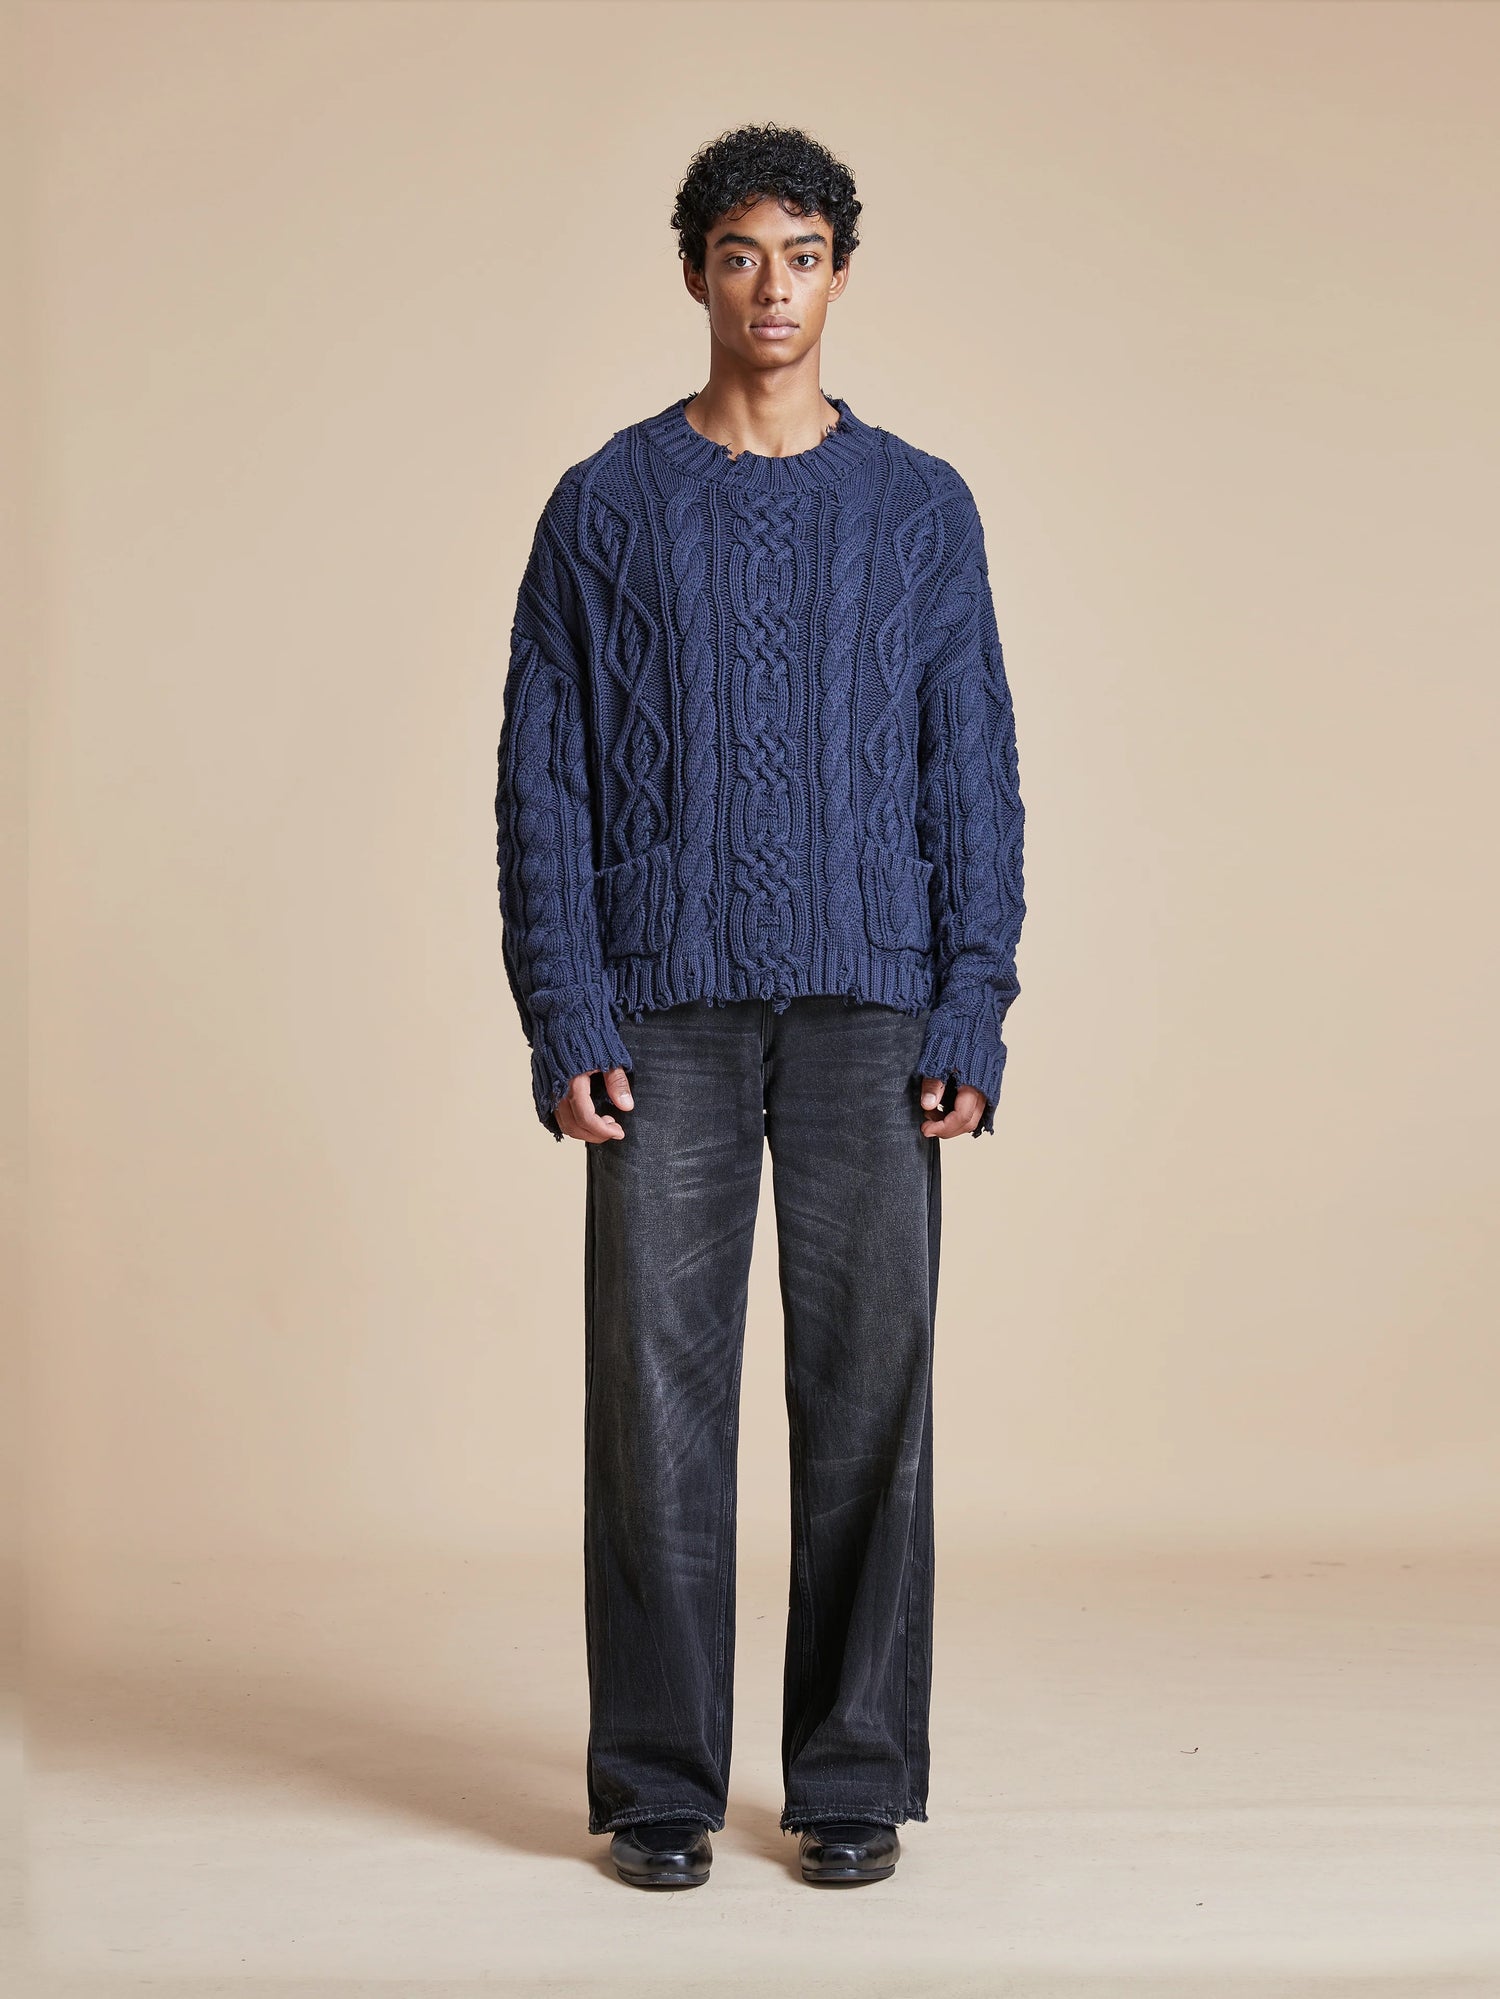 A man donning an Astral Distressed Cable Knit Sweater from Found in softness and warmth, paired with black pants.